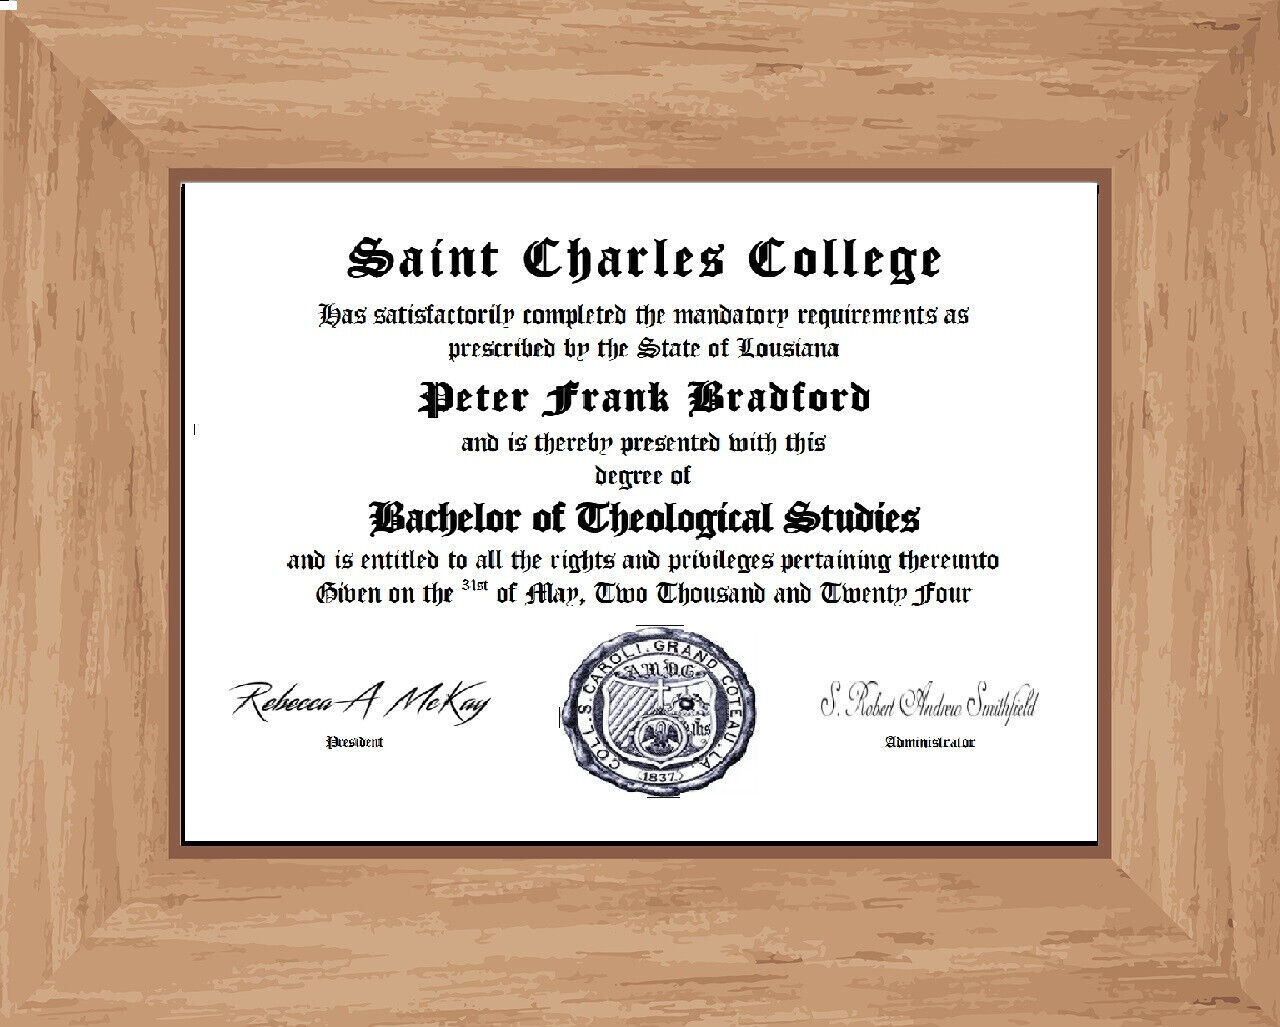 Impress Your Friends and Family with Your Own Personal Novelty College Diploma